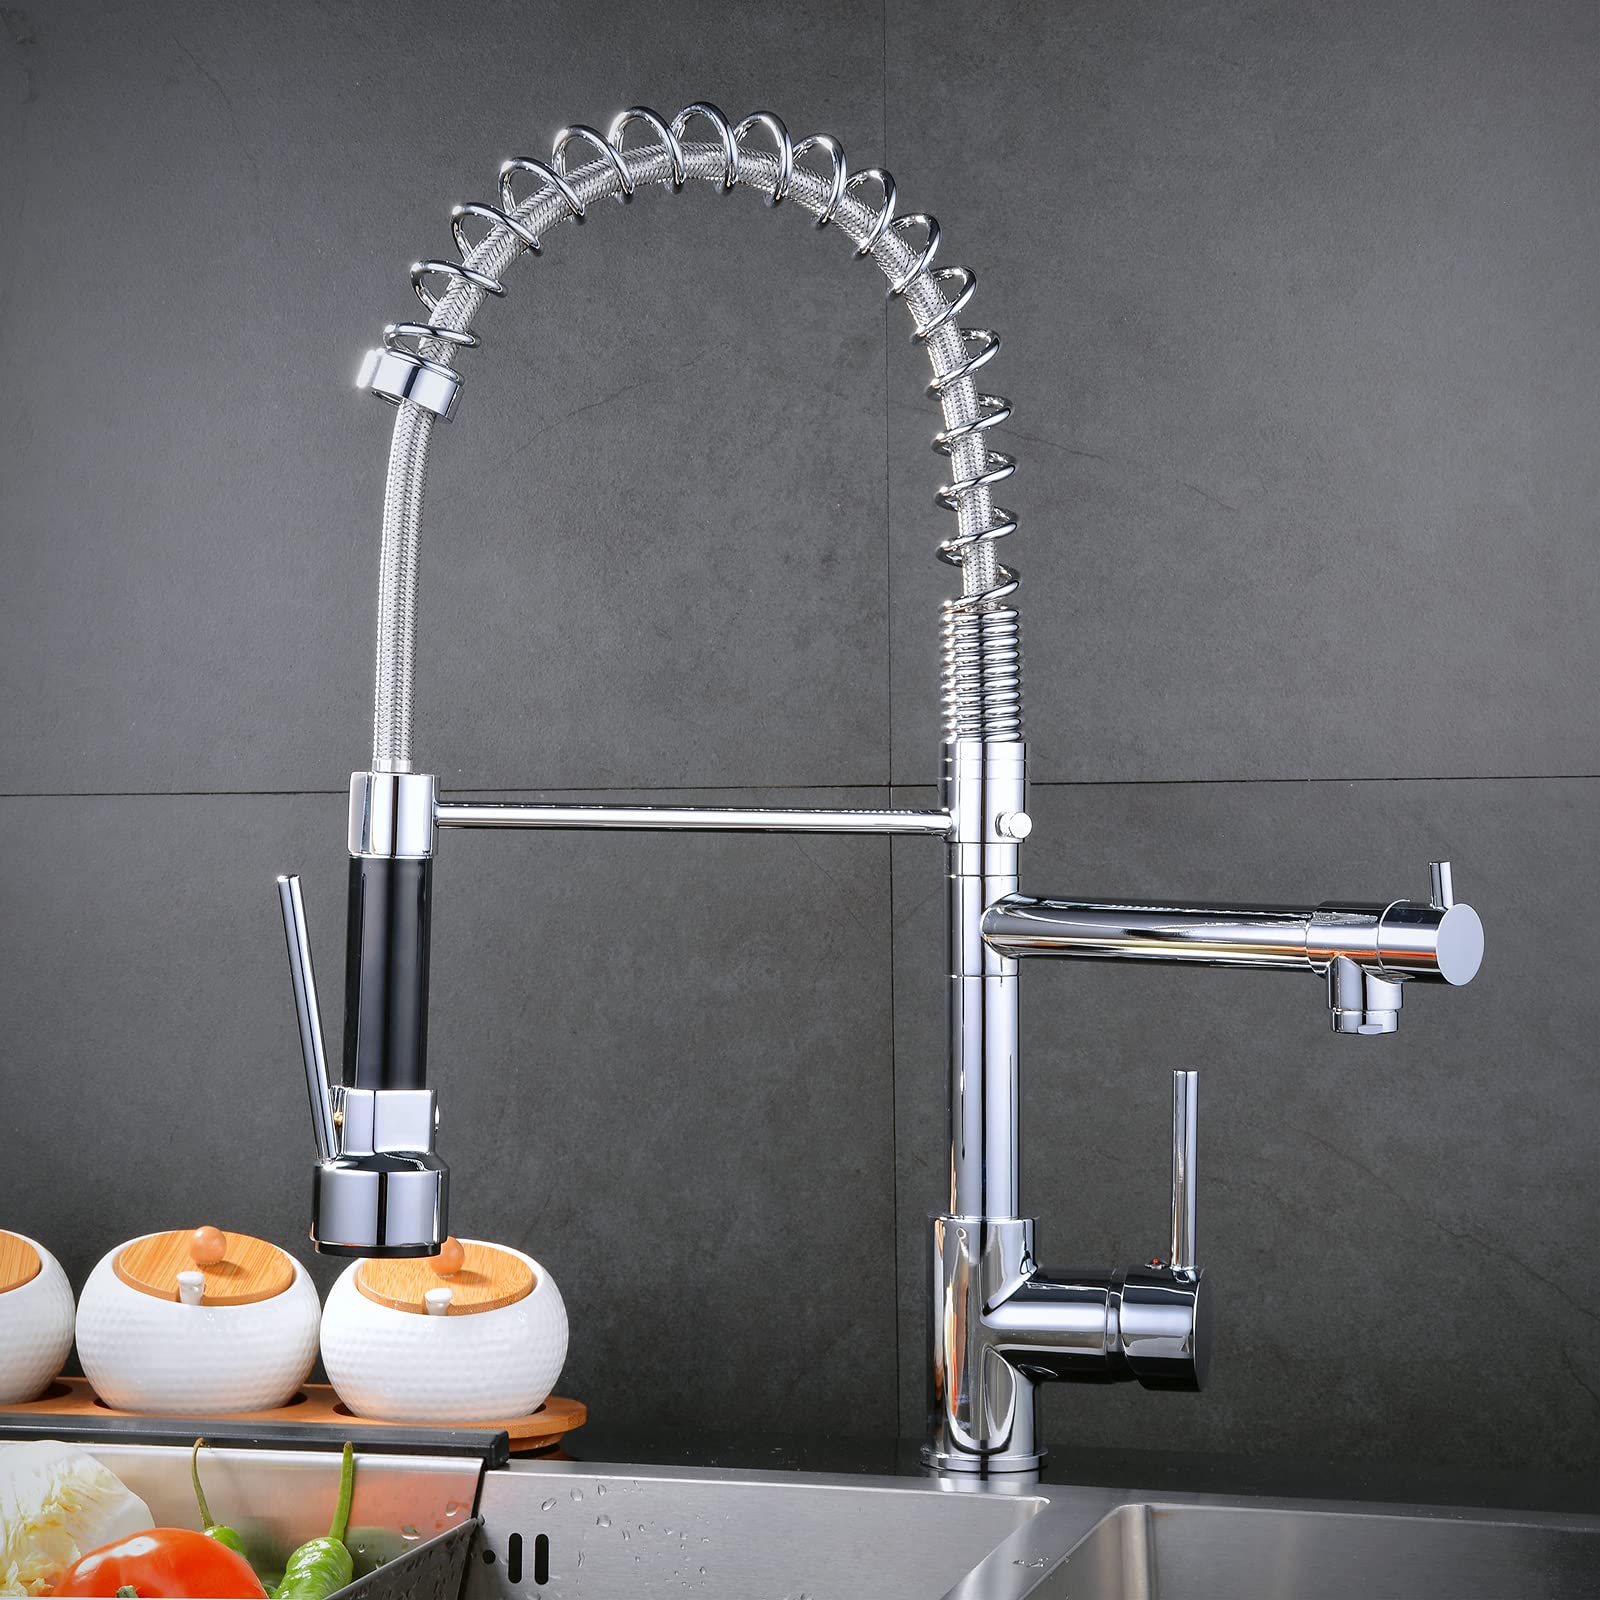 Aquacubic Top Class cUPC Commercial Spring neck Pull Down Kitchen Faucet with Sprayer 